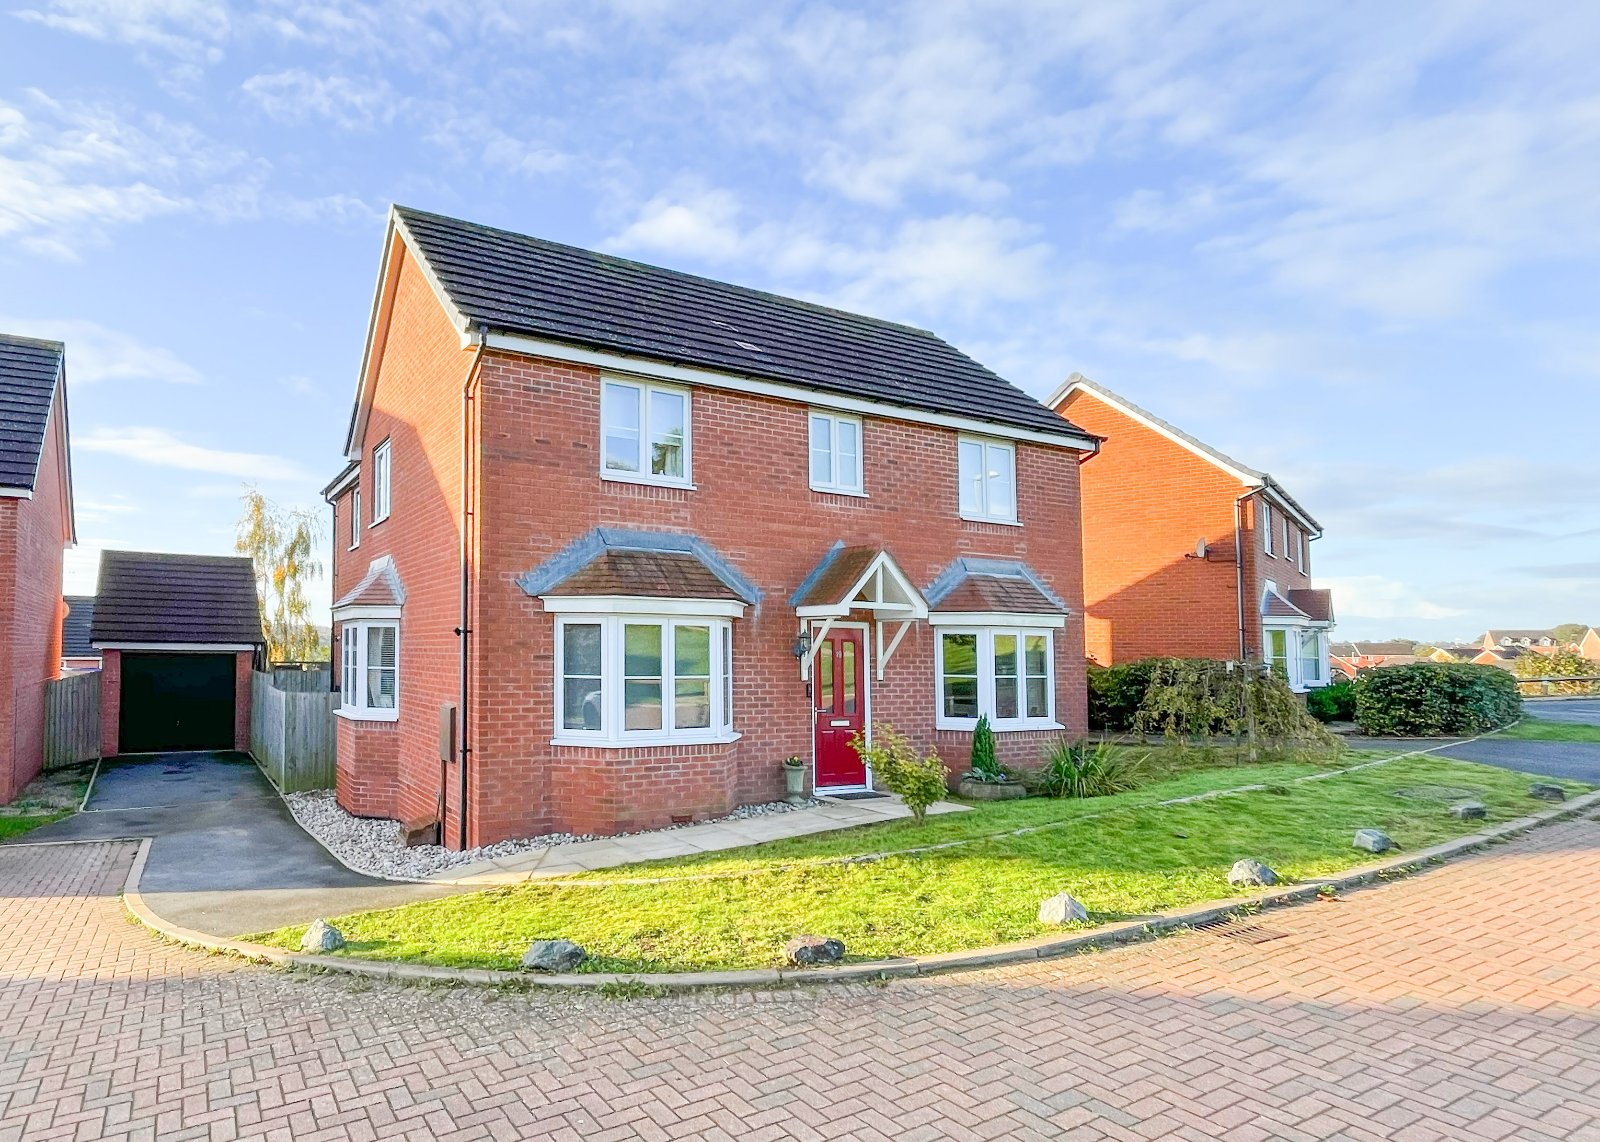 4 bed house for sale in Cookridge Close, Brockhill  - Property Image 1